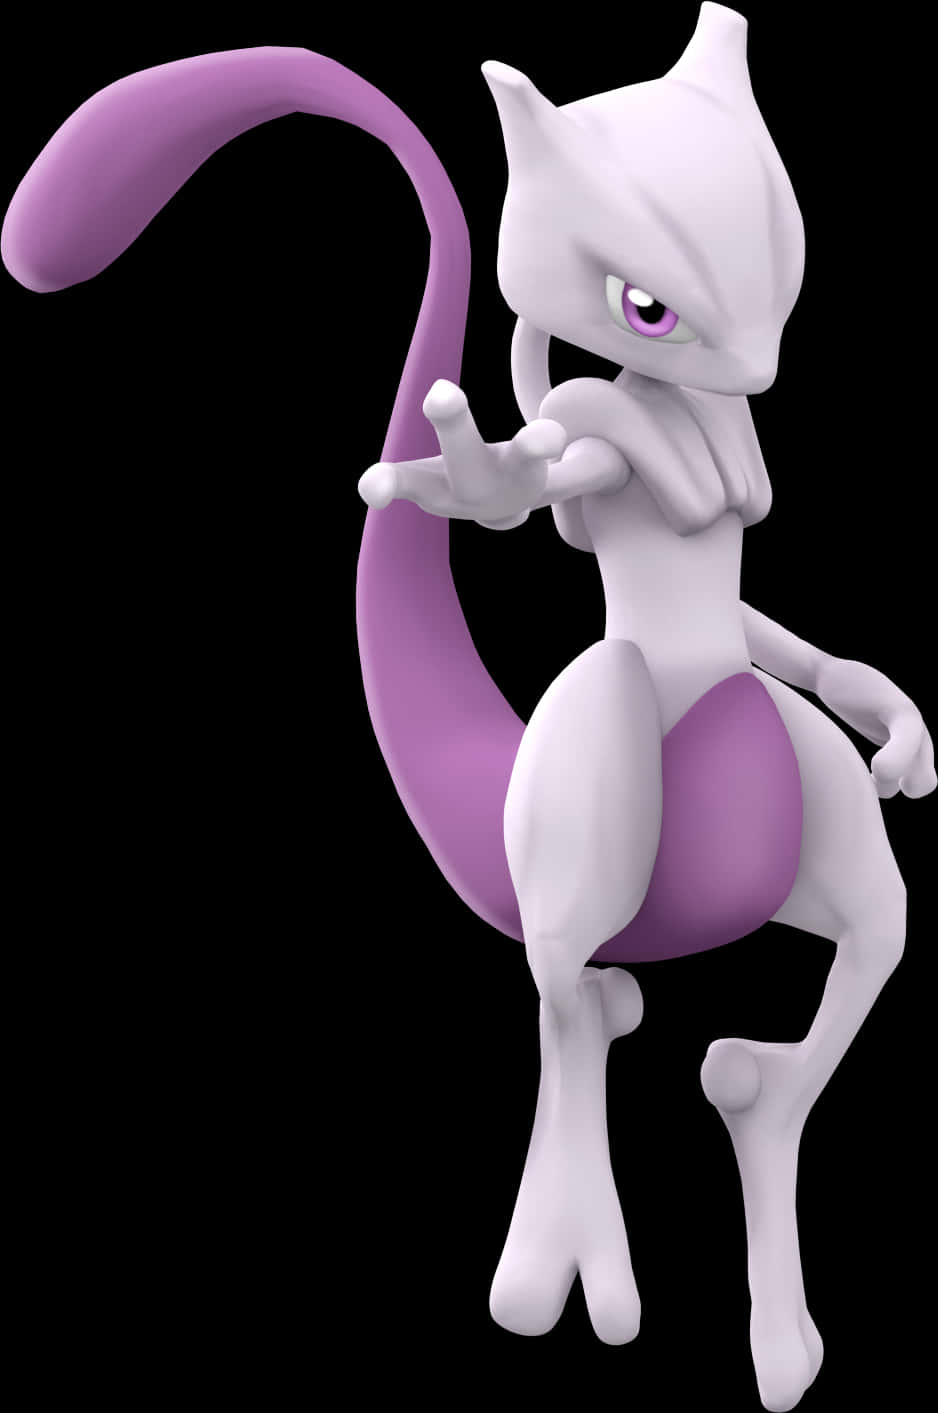 Mewtwo Pokemon Character Pose PNG